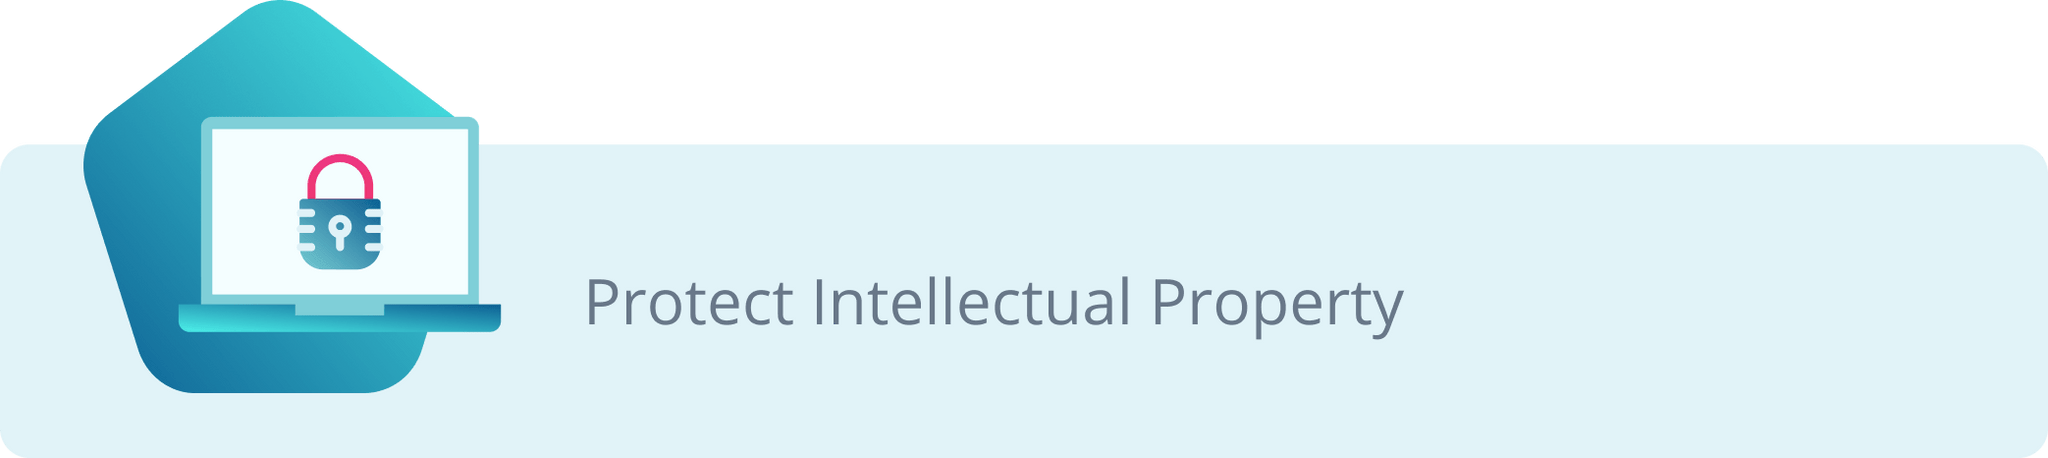 Protect intellectual property